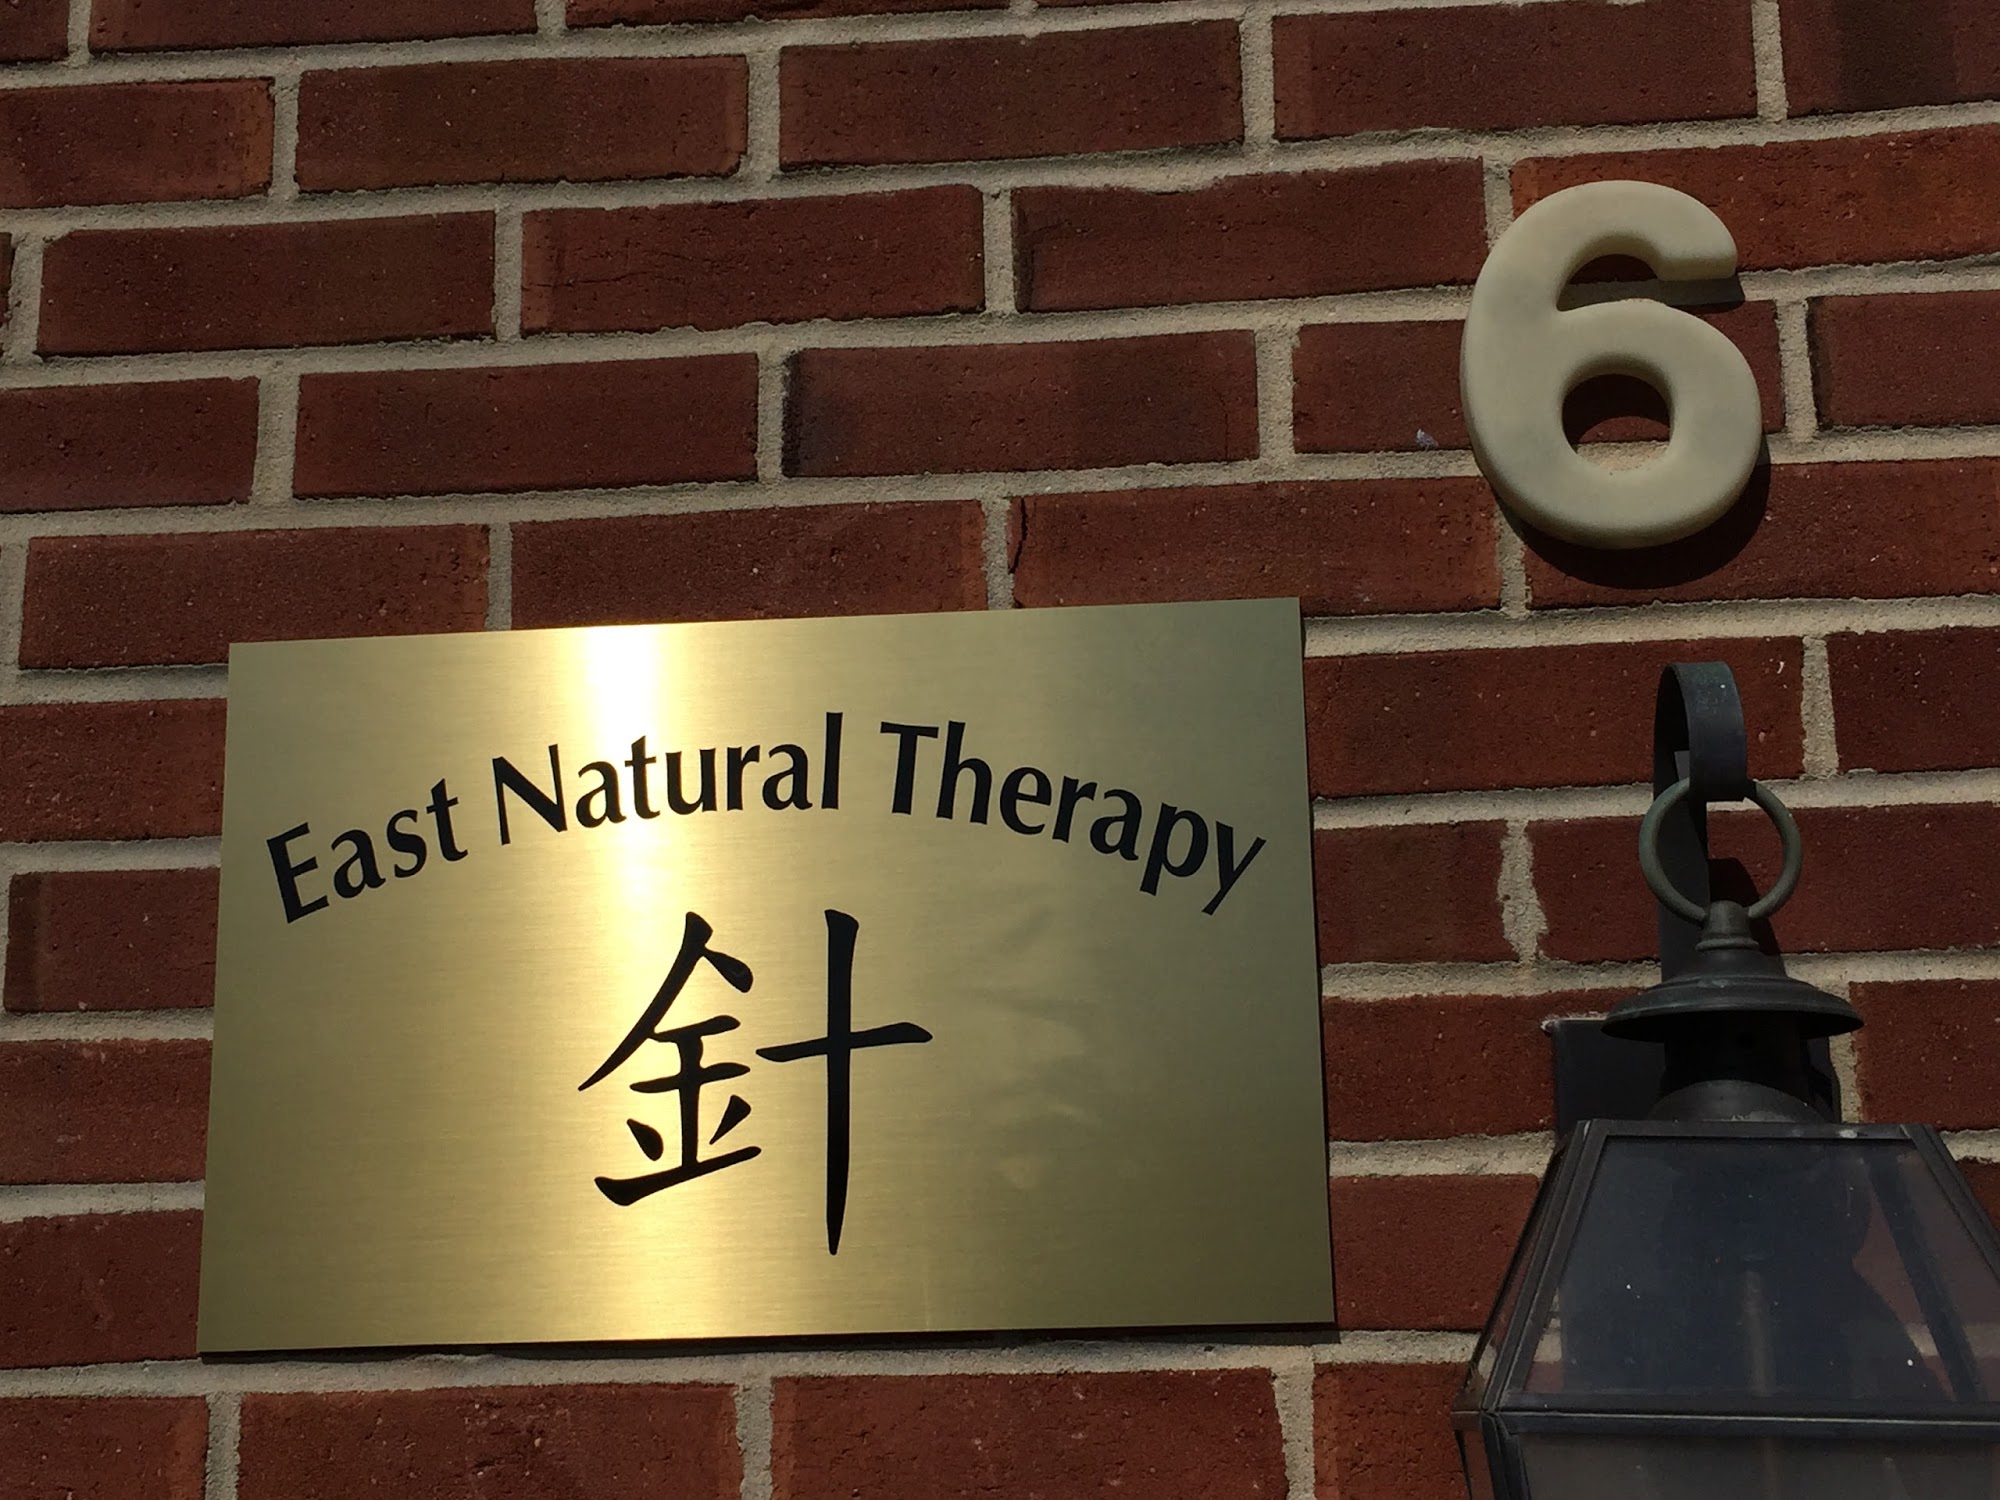 East Natural Therapy